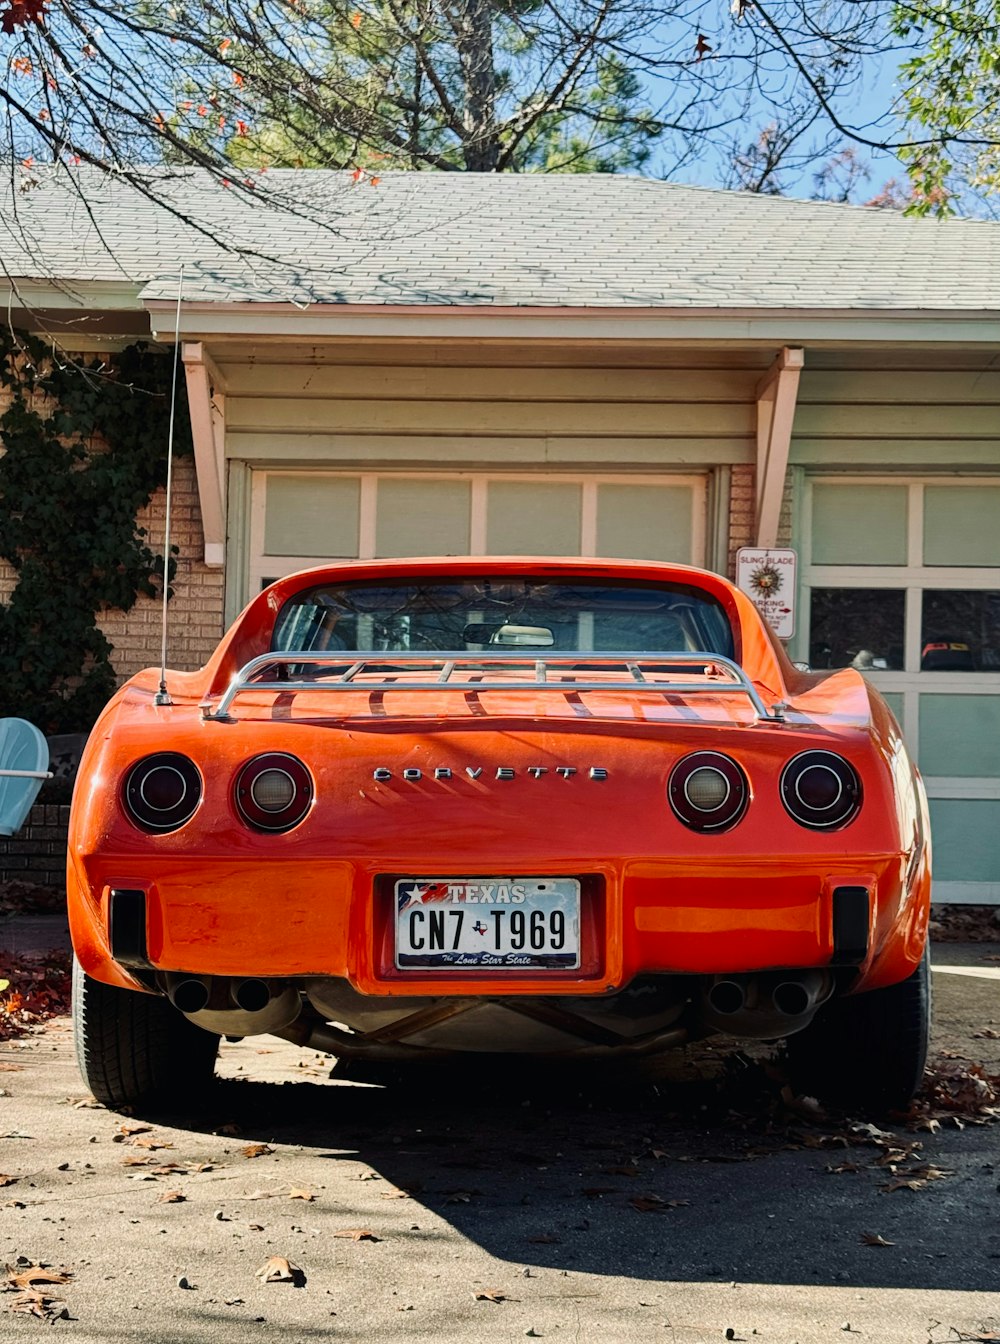 an orange car parked in front of a house